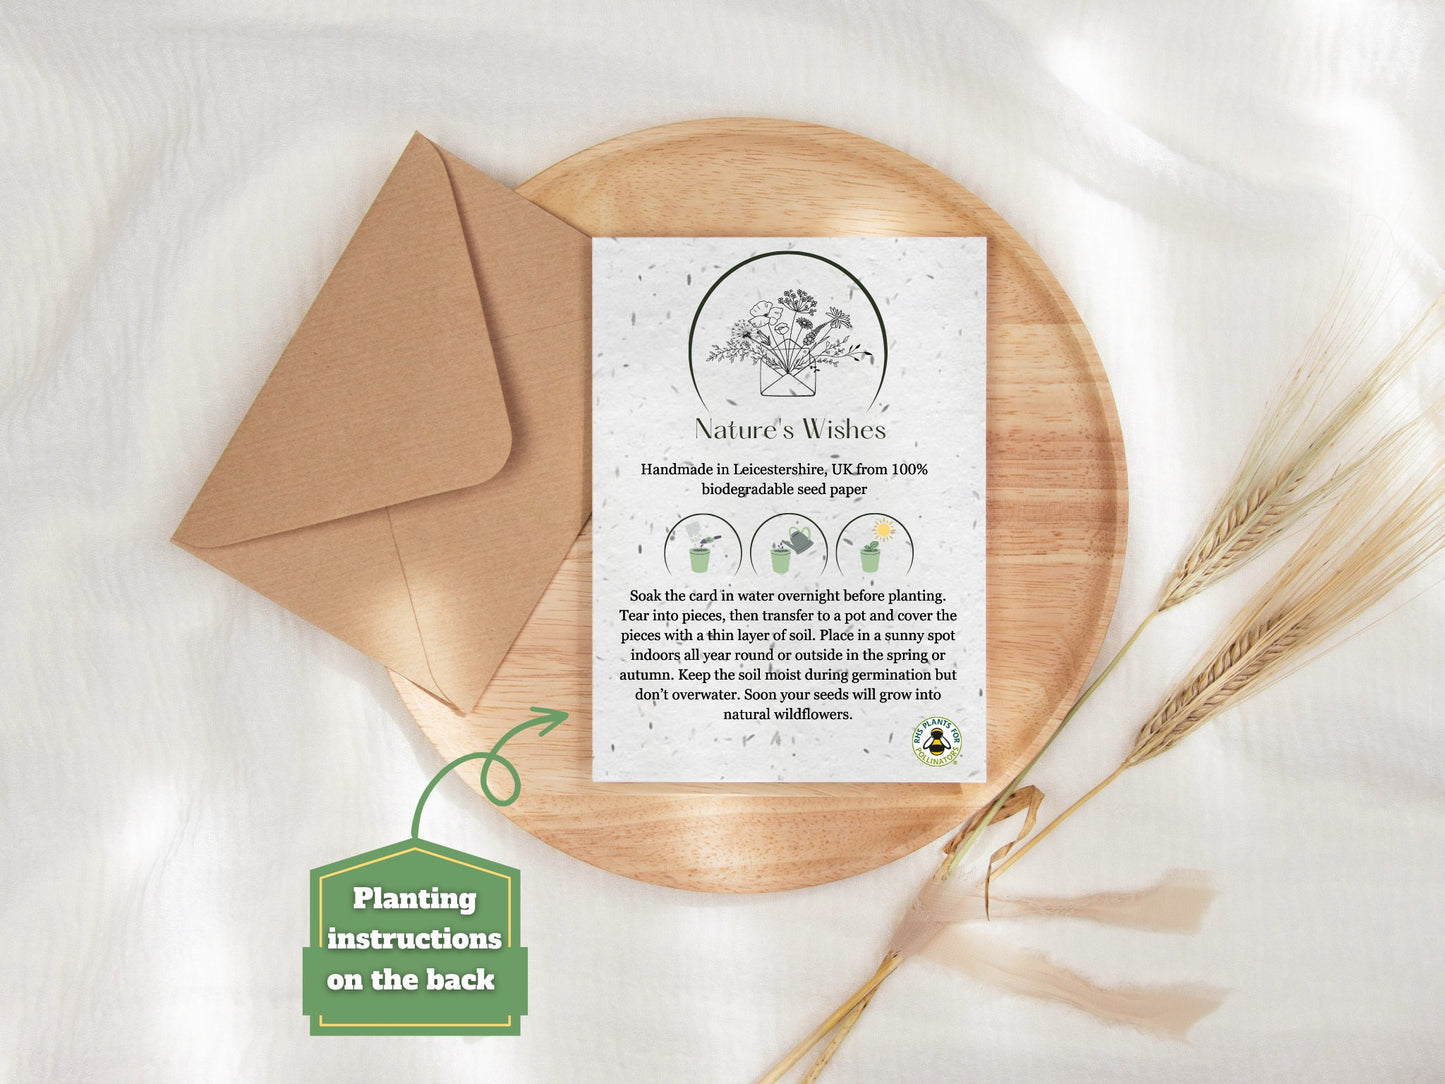 Plantable Seed Thank You Card, Thank you card, Biodegradable seed paper, Wildflower, Plantable Eco-Friendly Gift, Bee friendly